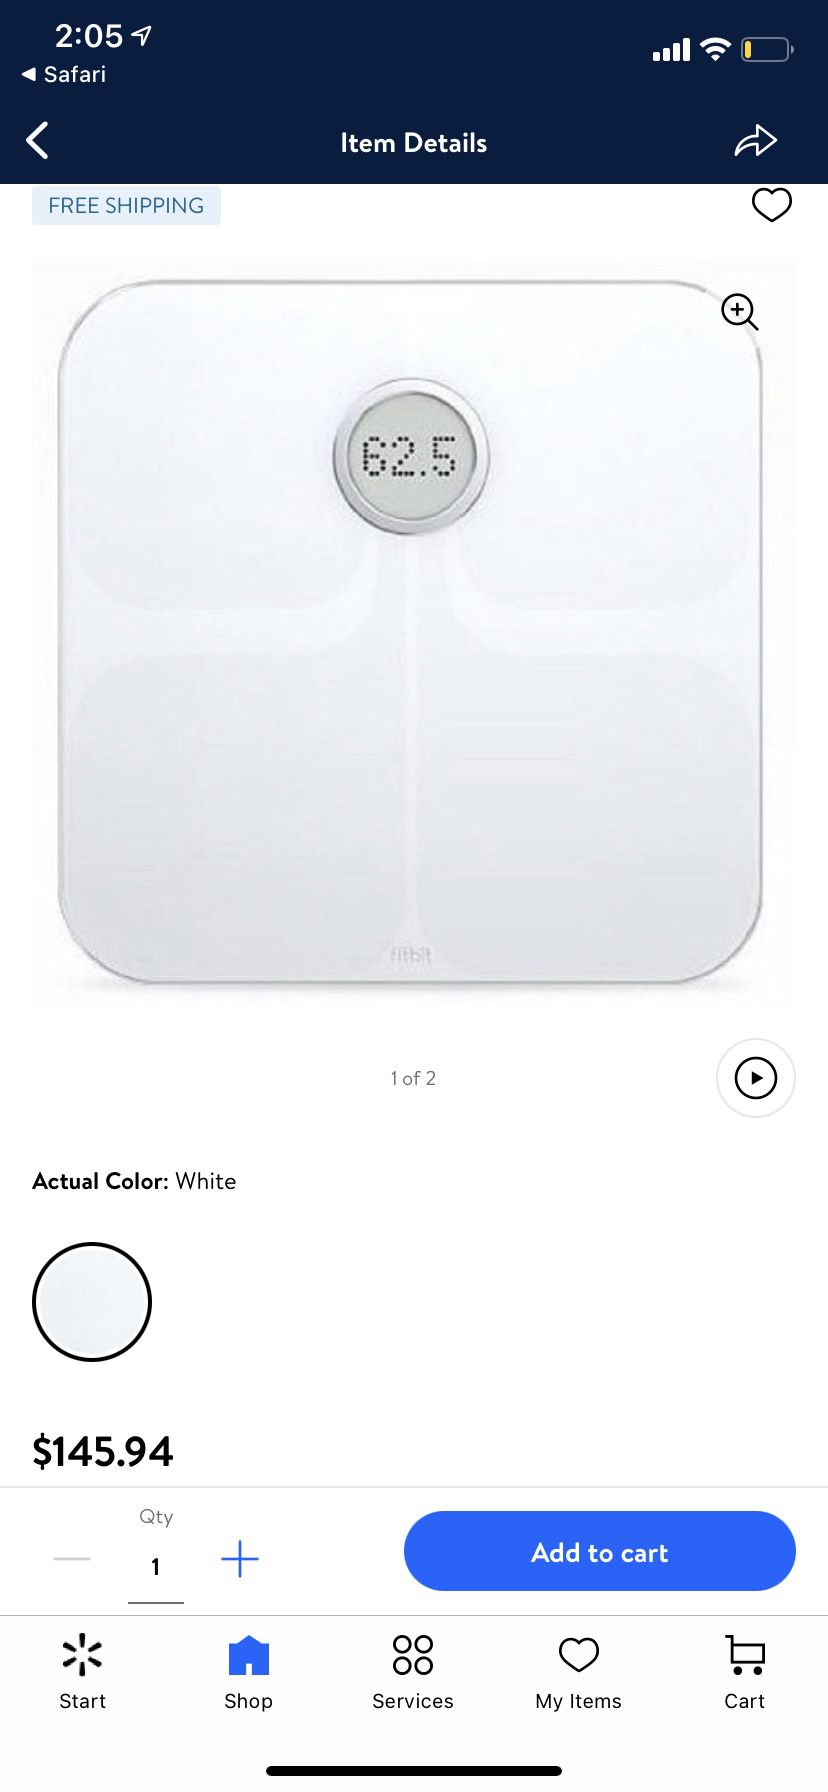 Fitbit Aria Smart Scale for Sale in Wilbraham, MA - OfferUp